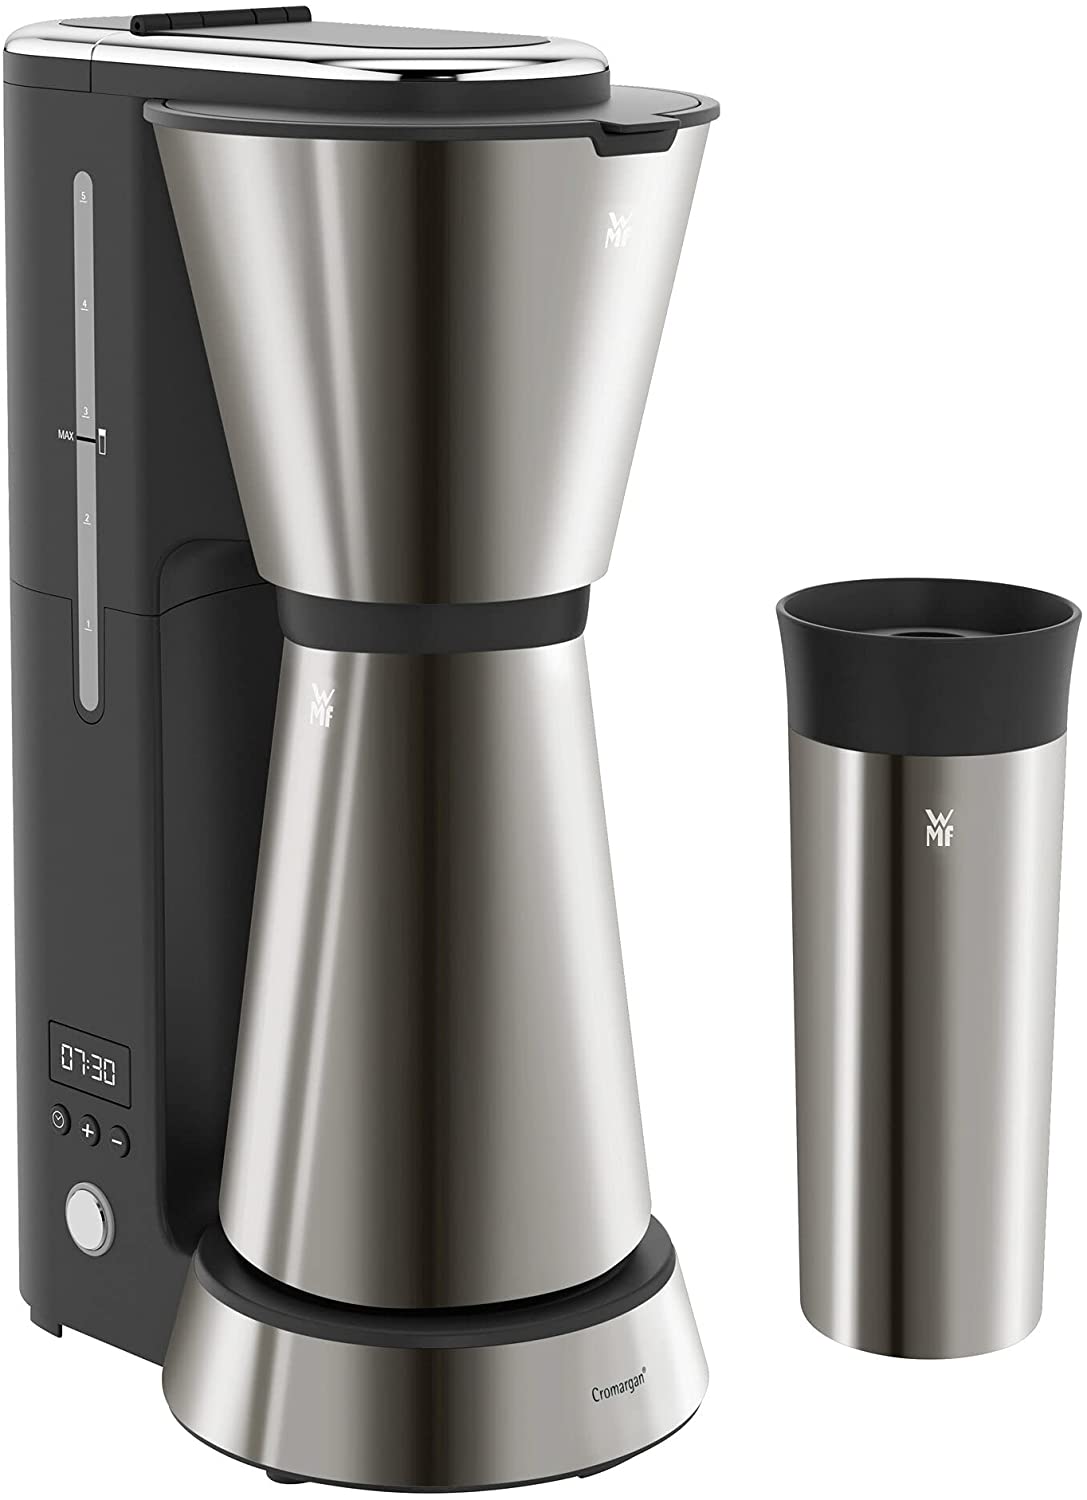 WMF Küchenminis Aroma Coffee Maker, with Thermos Flask, Filter Coffee 5 Cups, Thermal Mug to Go (350 ml), 870 Watt, 24 Hour Timer Automatic Switch Off